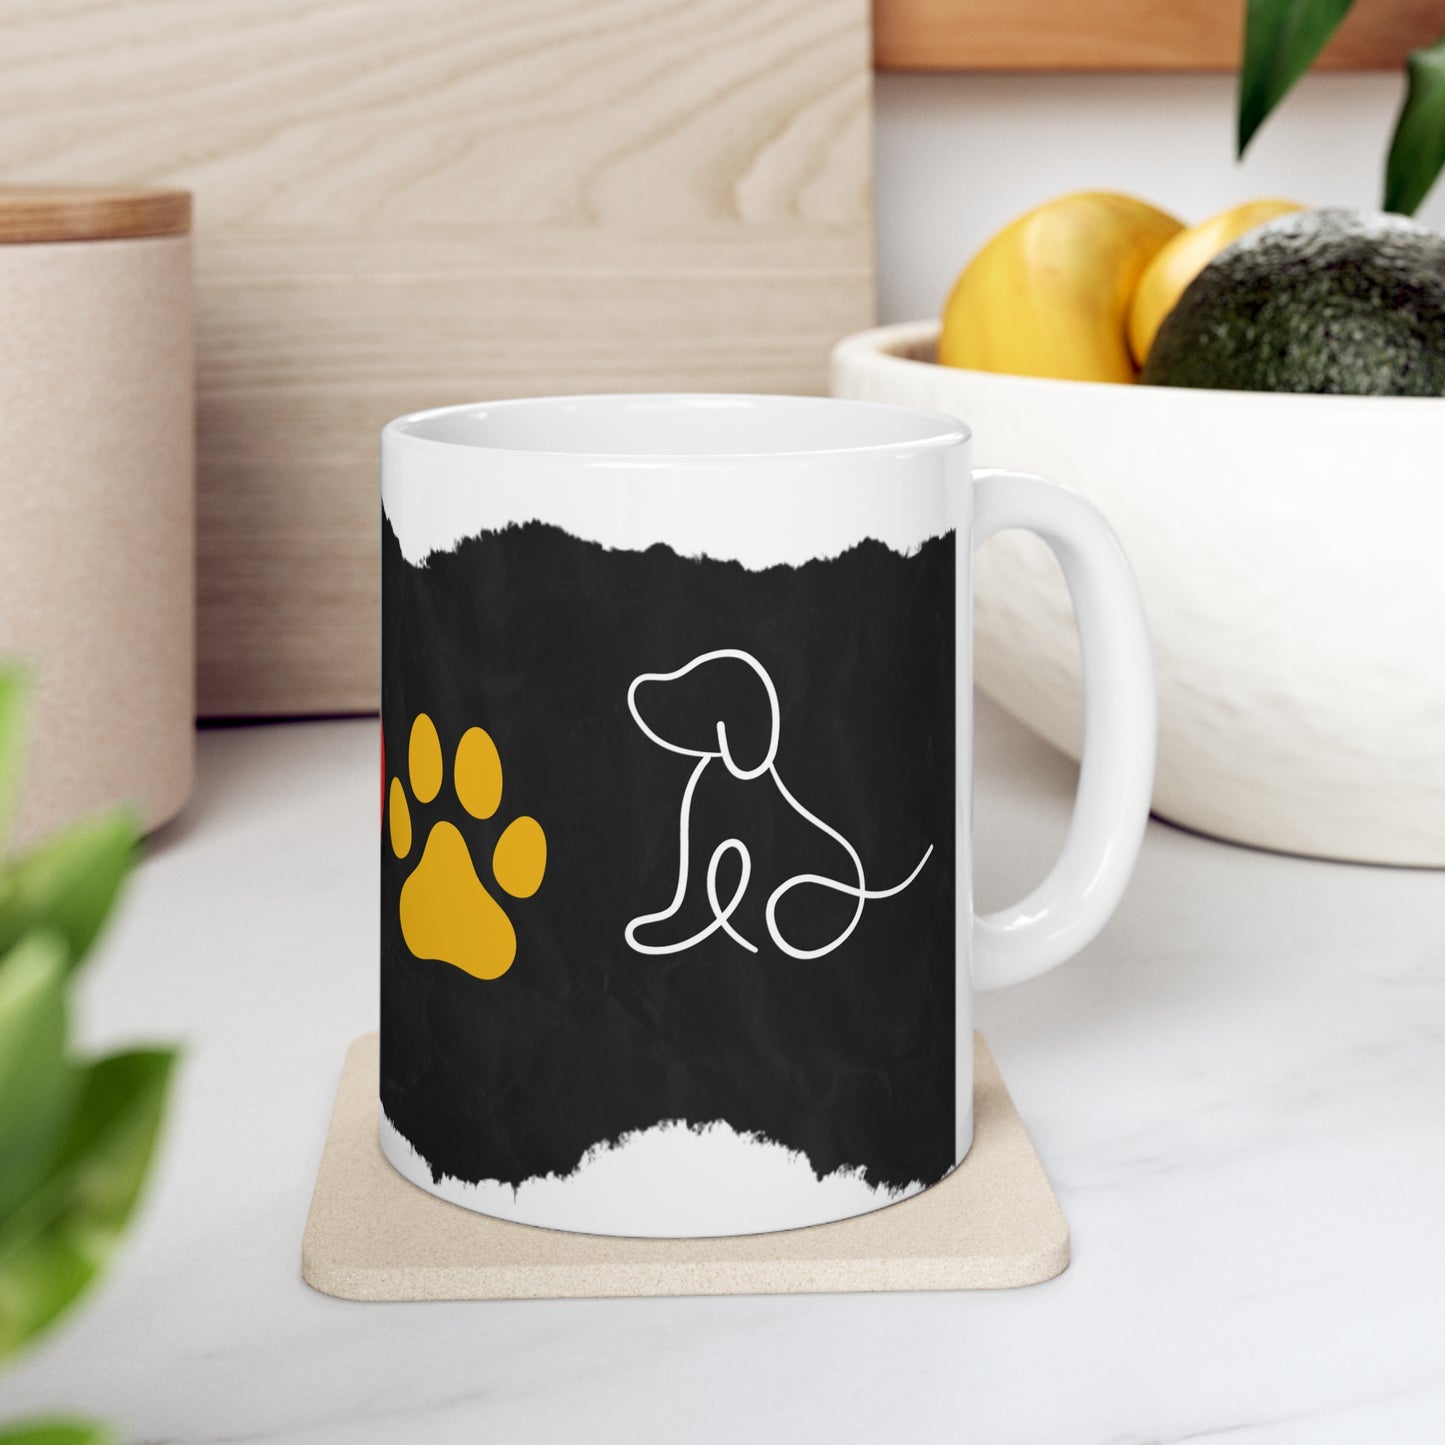 A Dog Lover’s Coffee Cup! Colorful coffee mug celebrating our love for our furry best friends. Enjoy!